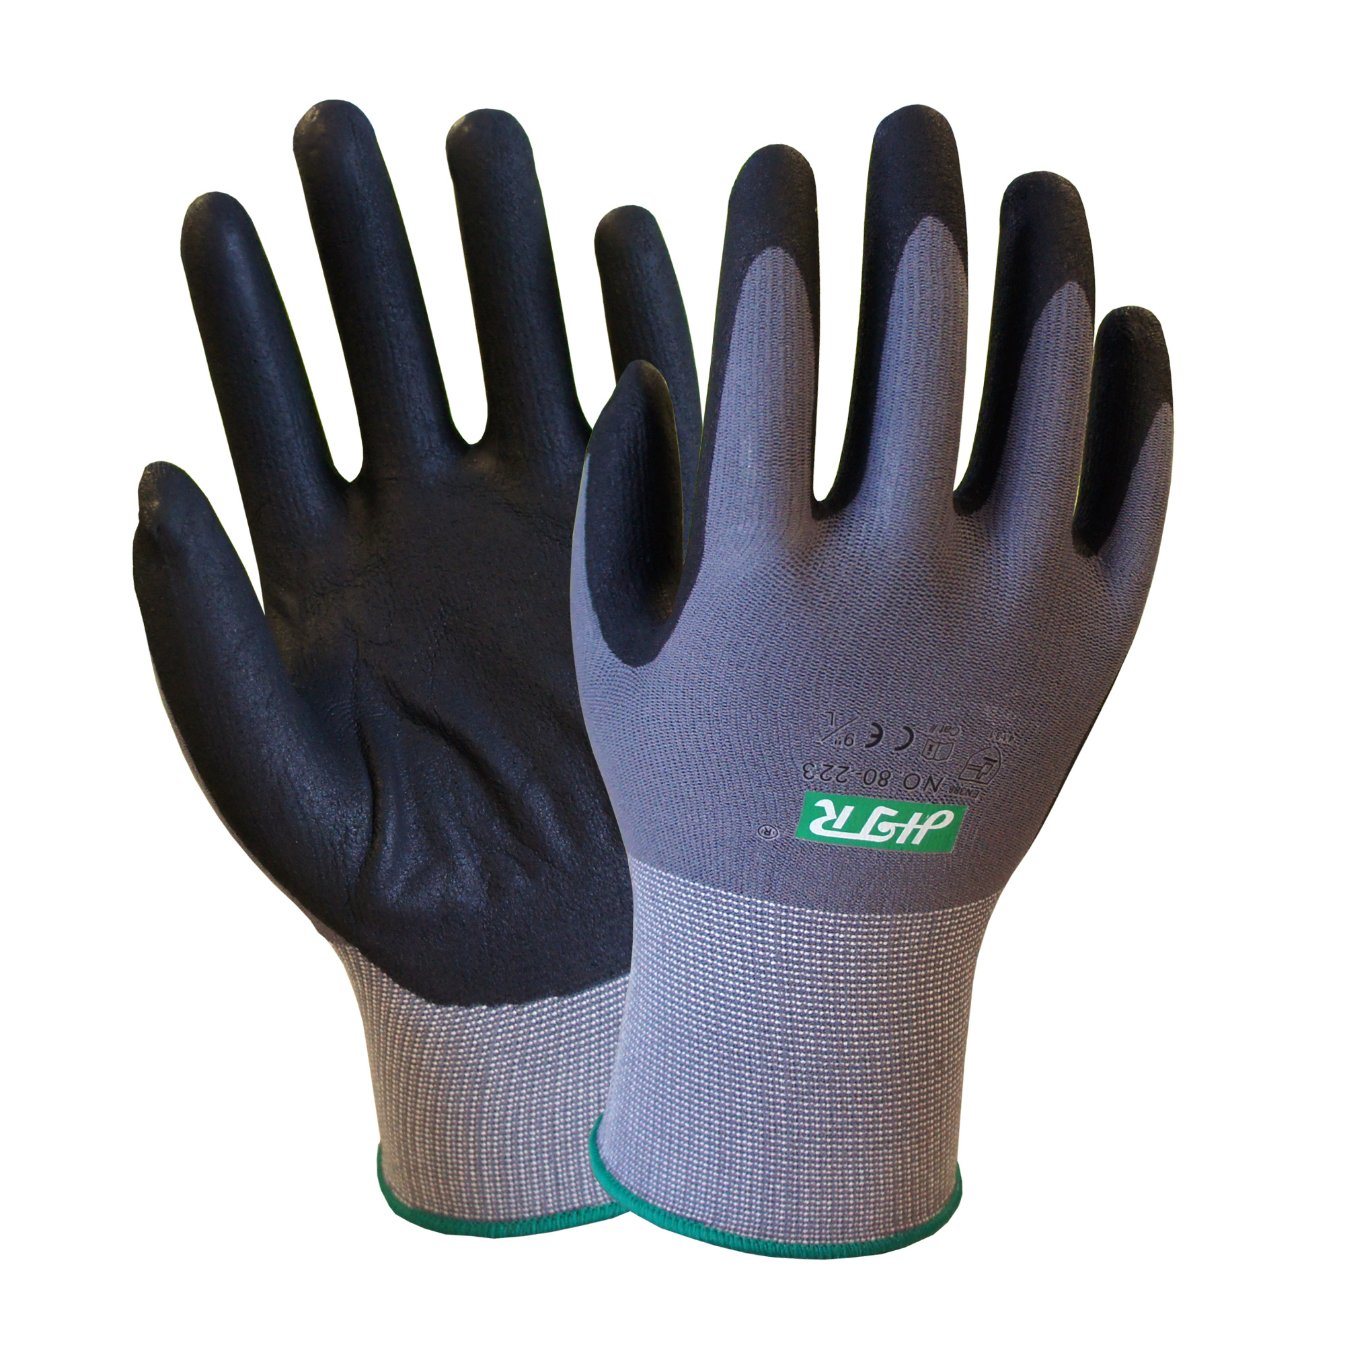 15G Knitted Oil-Proof Safety Work Gloves with Nitrile Palm